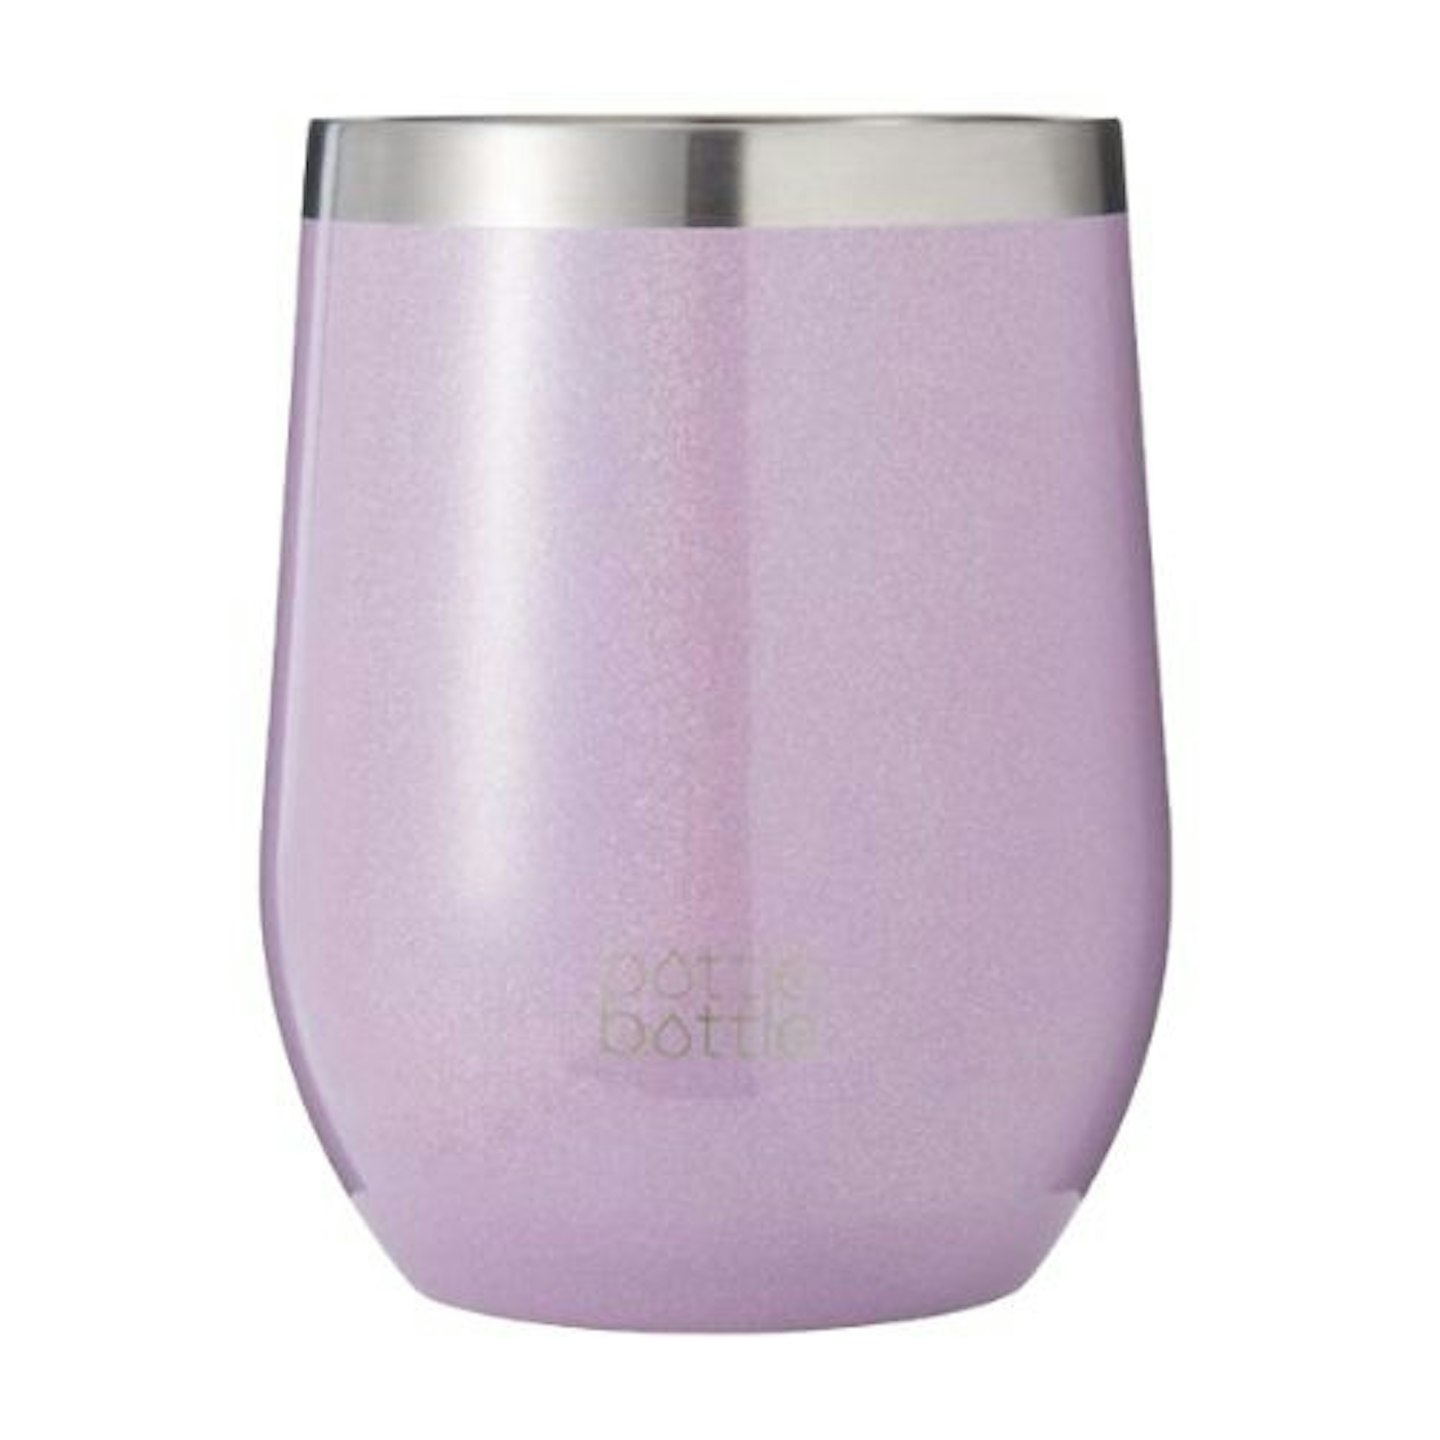 BOTTLE BOTTLE 350ml Vacuum Insulated Cup